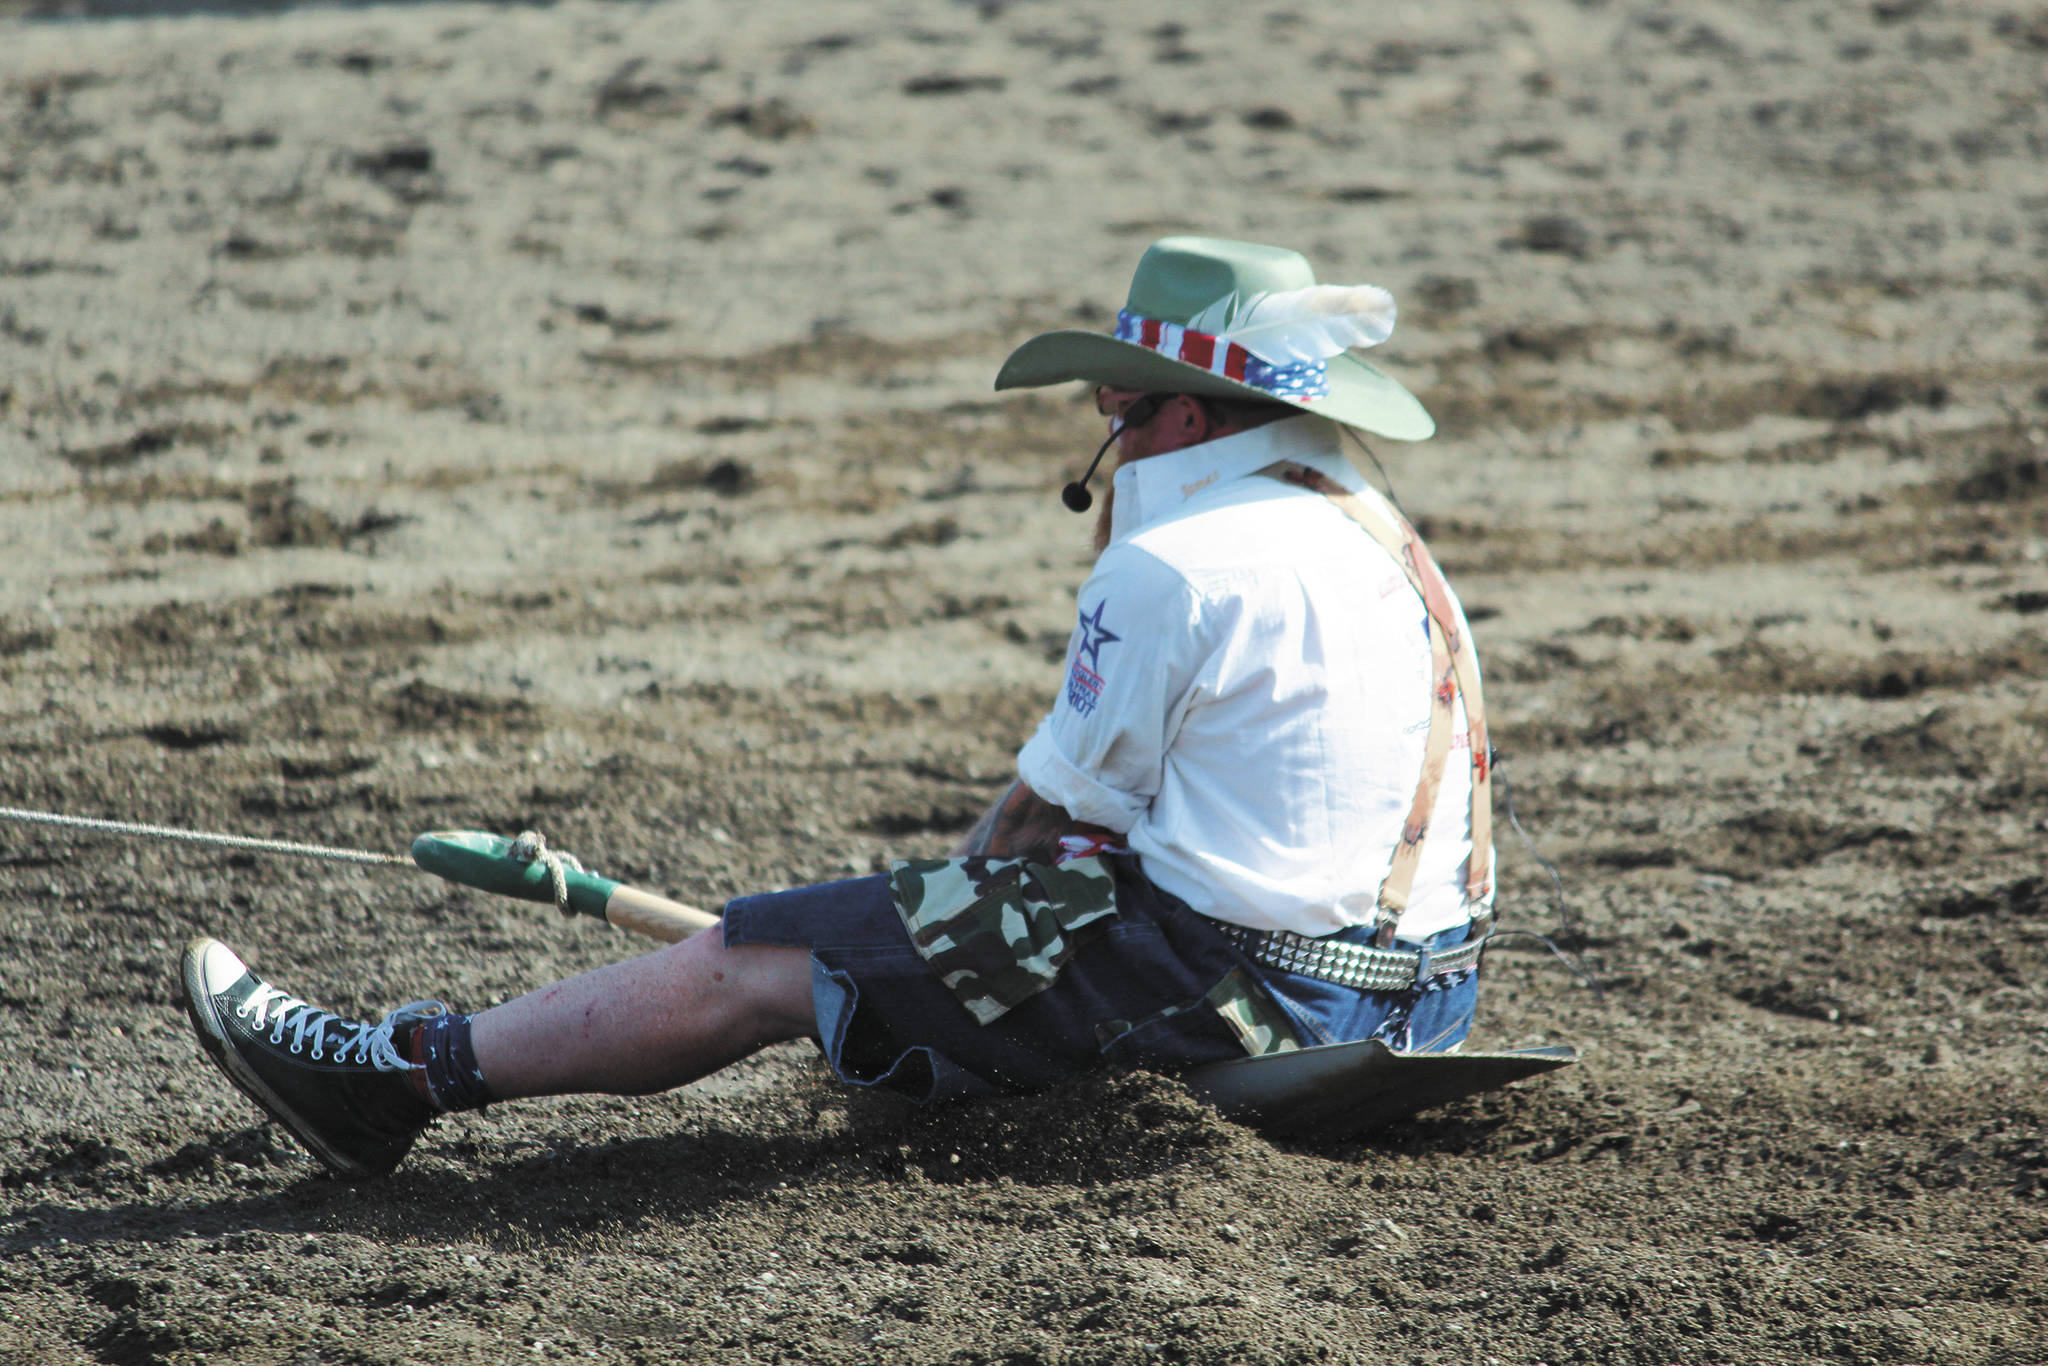 Rodeo announcer James Hastings is pulled behind a horse during the shovel race at the annual Ninilchik Rodeo on Saturday, July 4, 2020 at the Kenai Peninsula Fairgrounds in Ninilchik, Alaska.